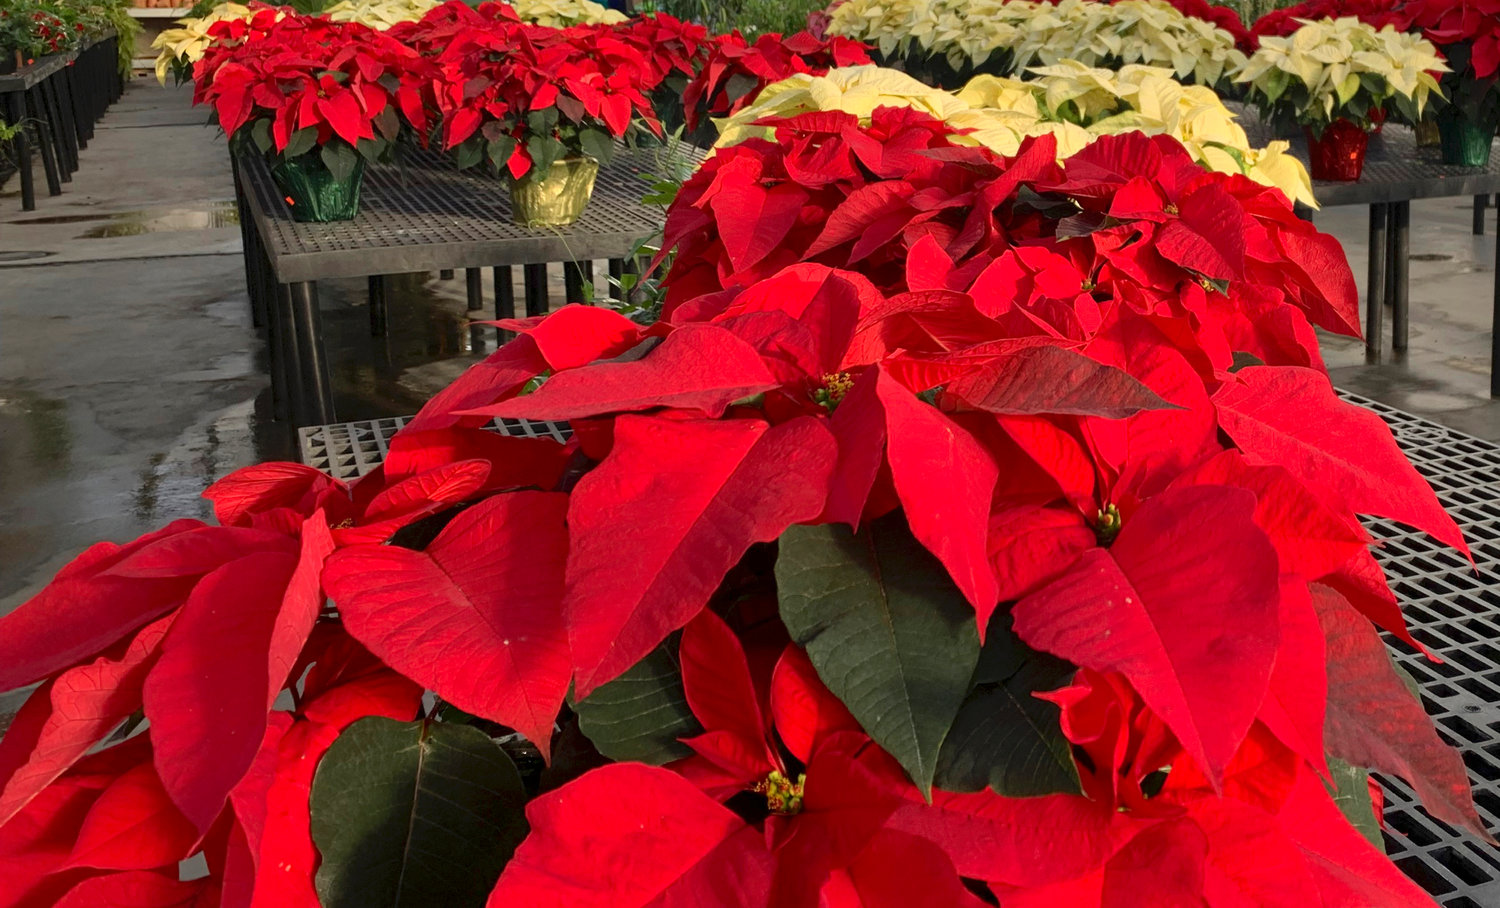 Poinsettias appear on display at a nursery in Larchmont on Monday, Dec. 5.